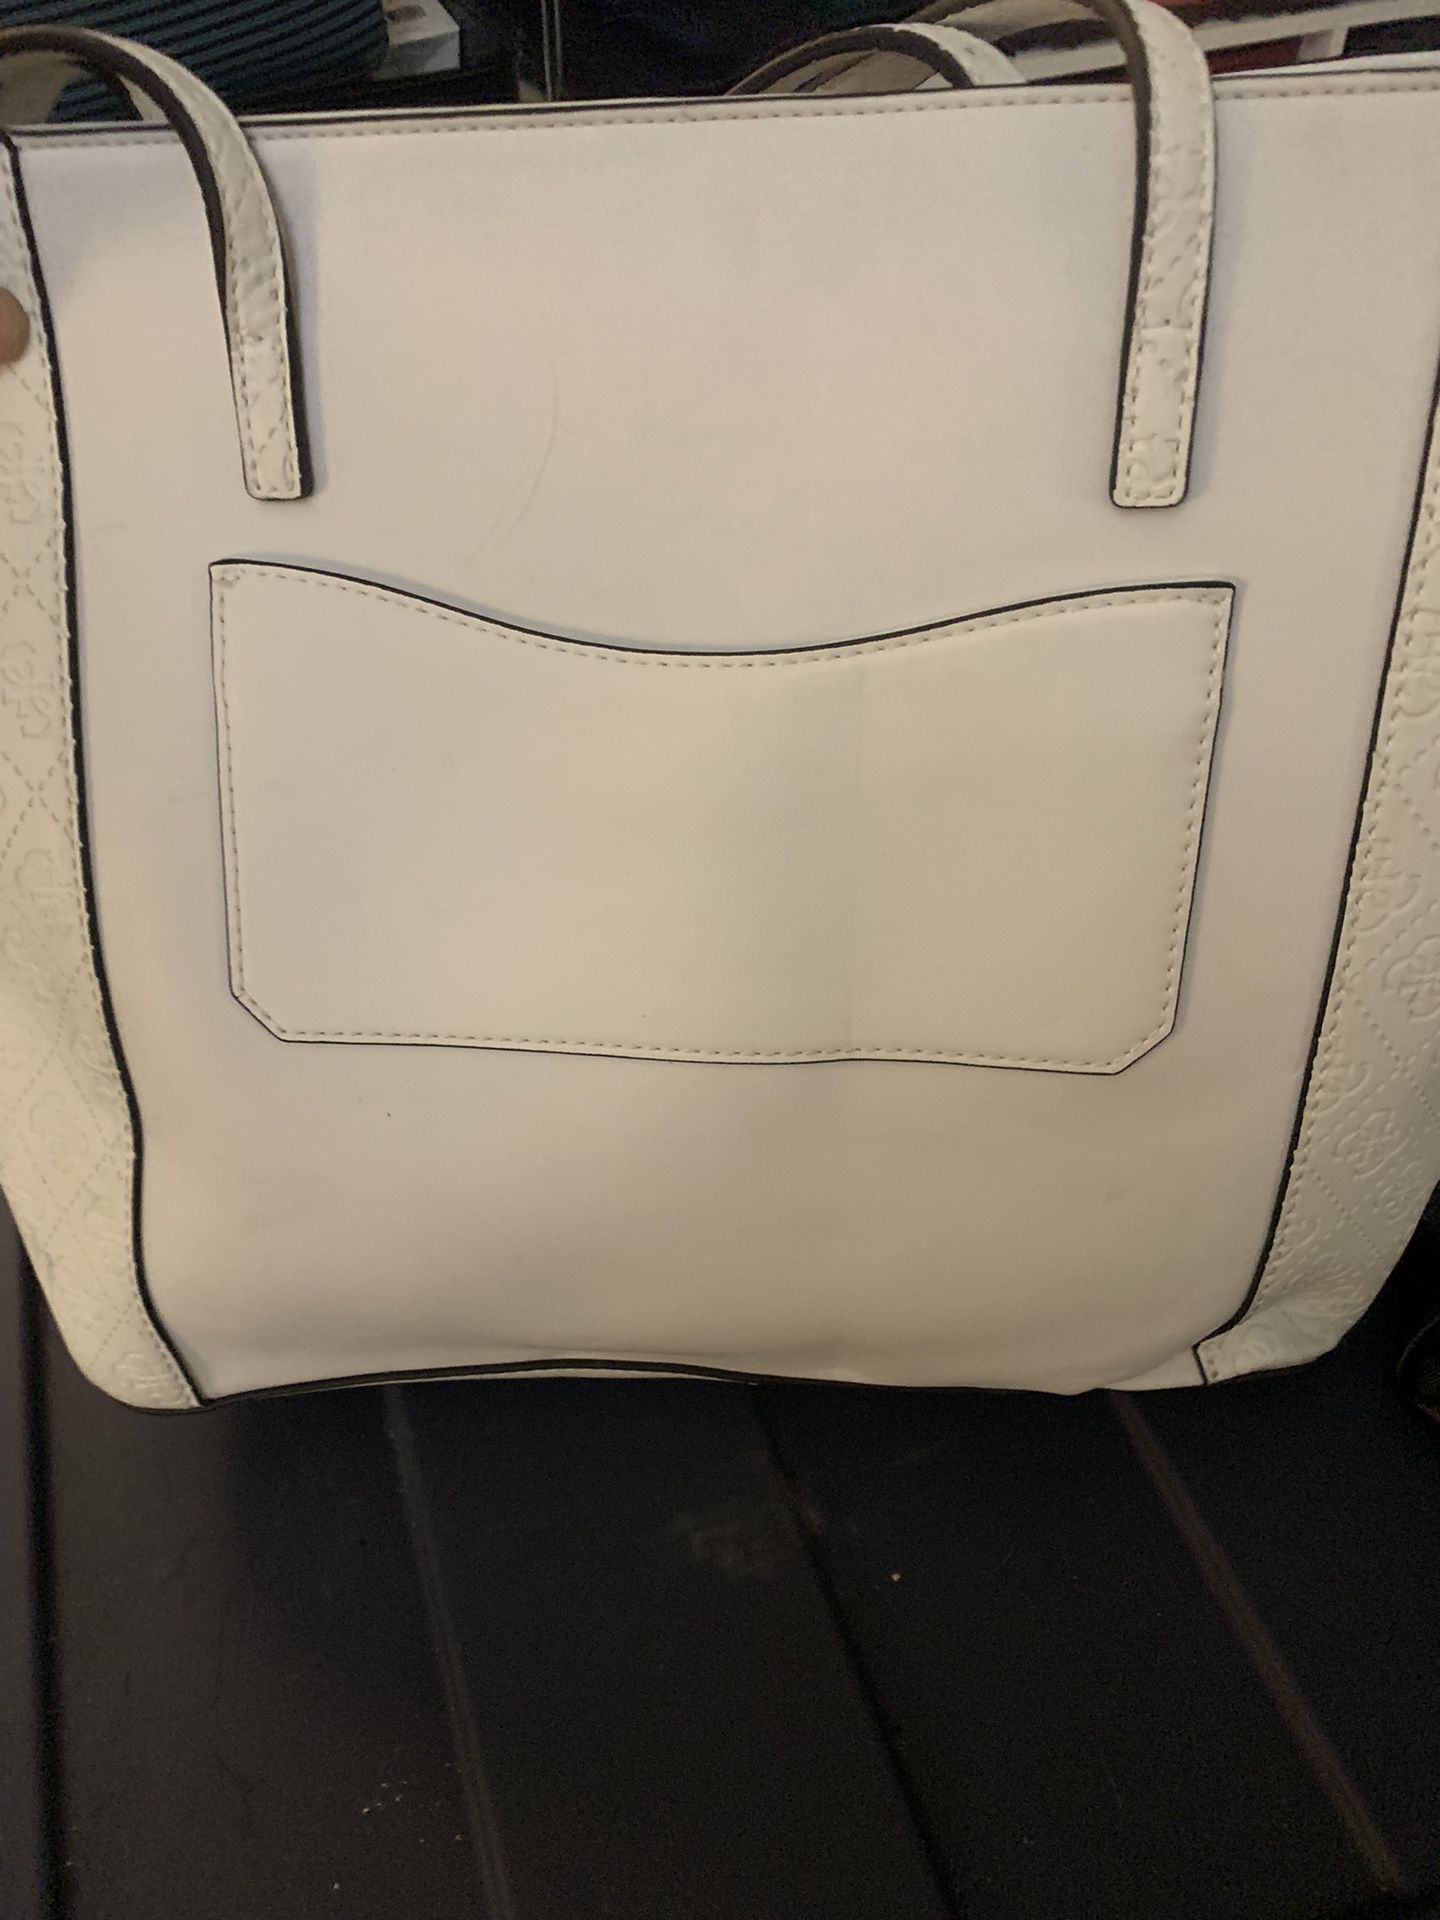 Guess purse for Sale in Chandler, AZ - OfferUp